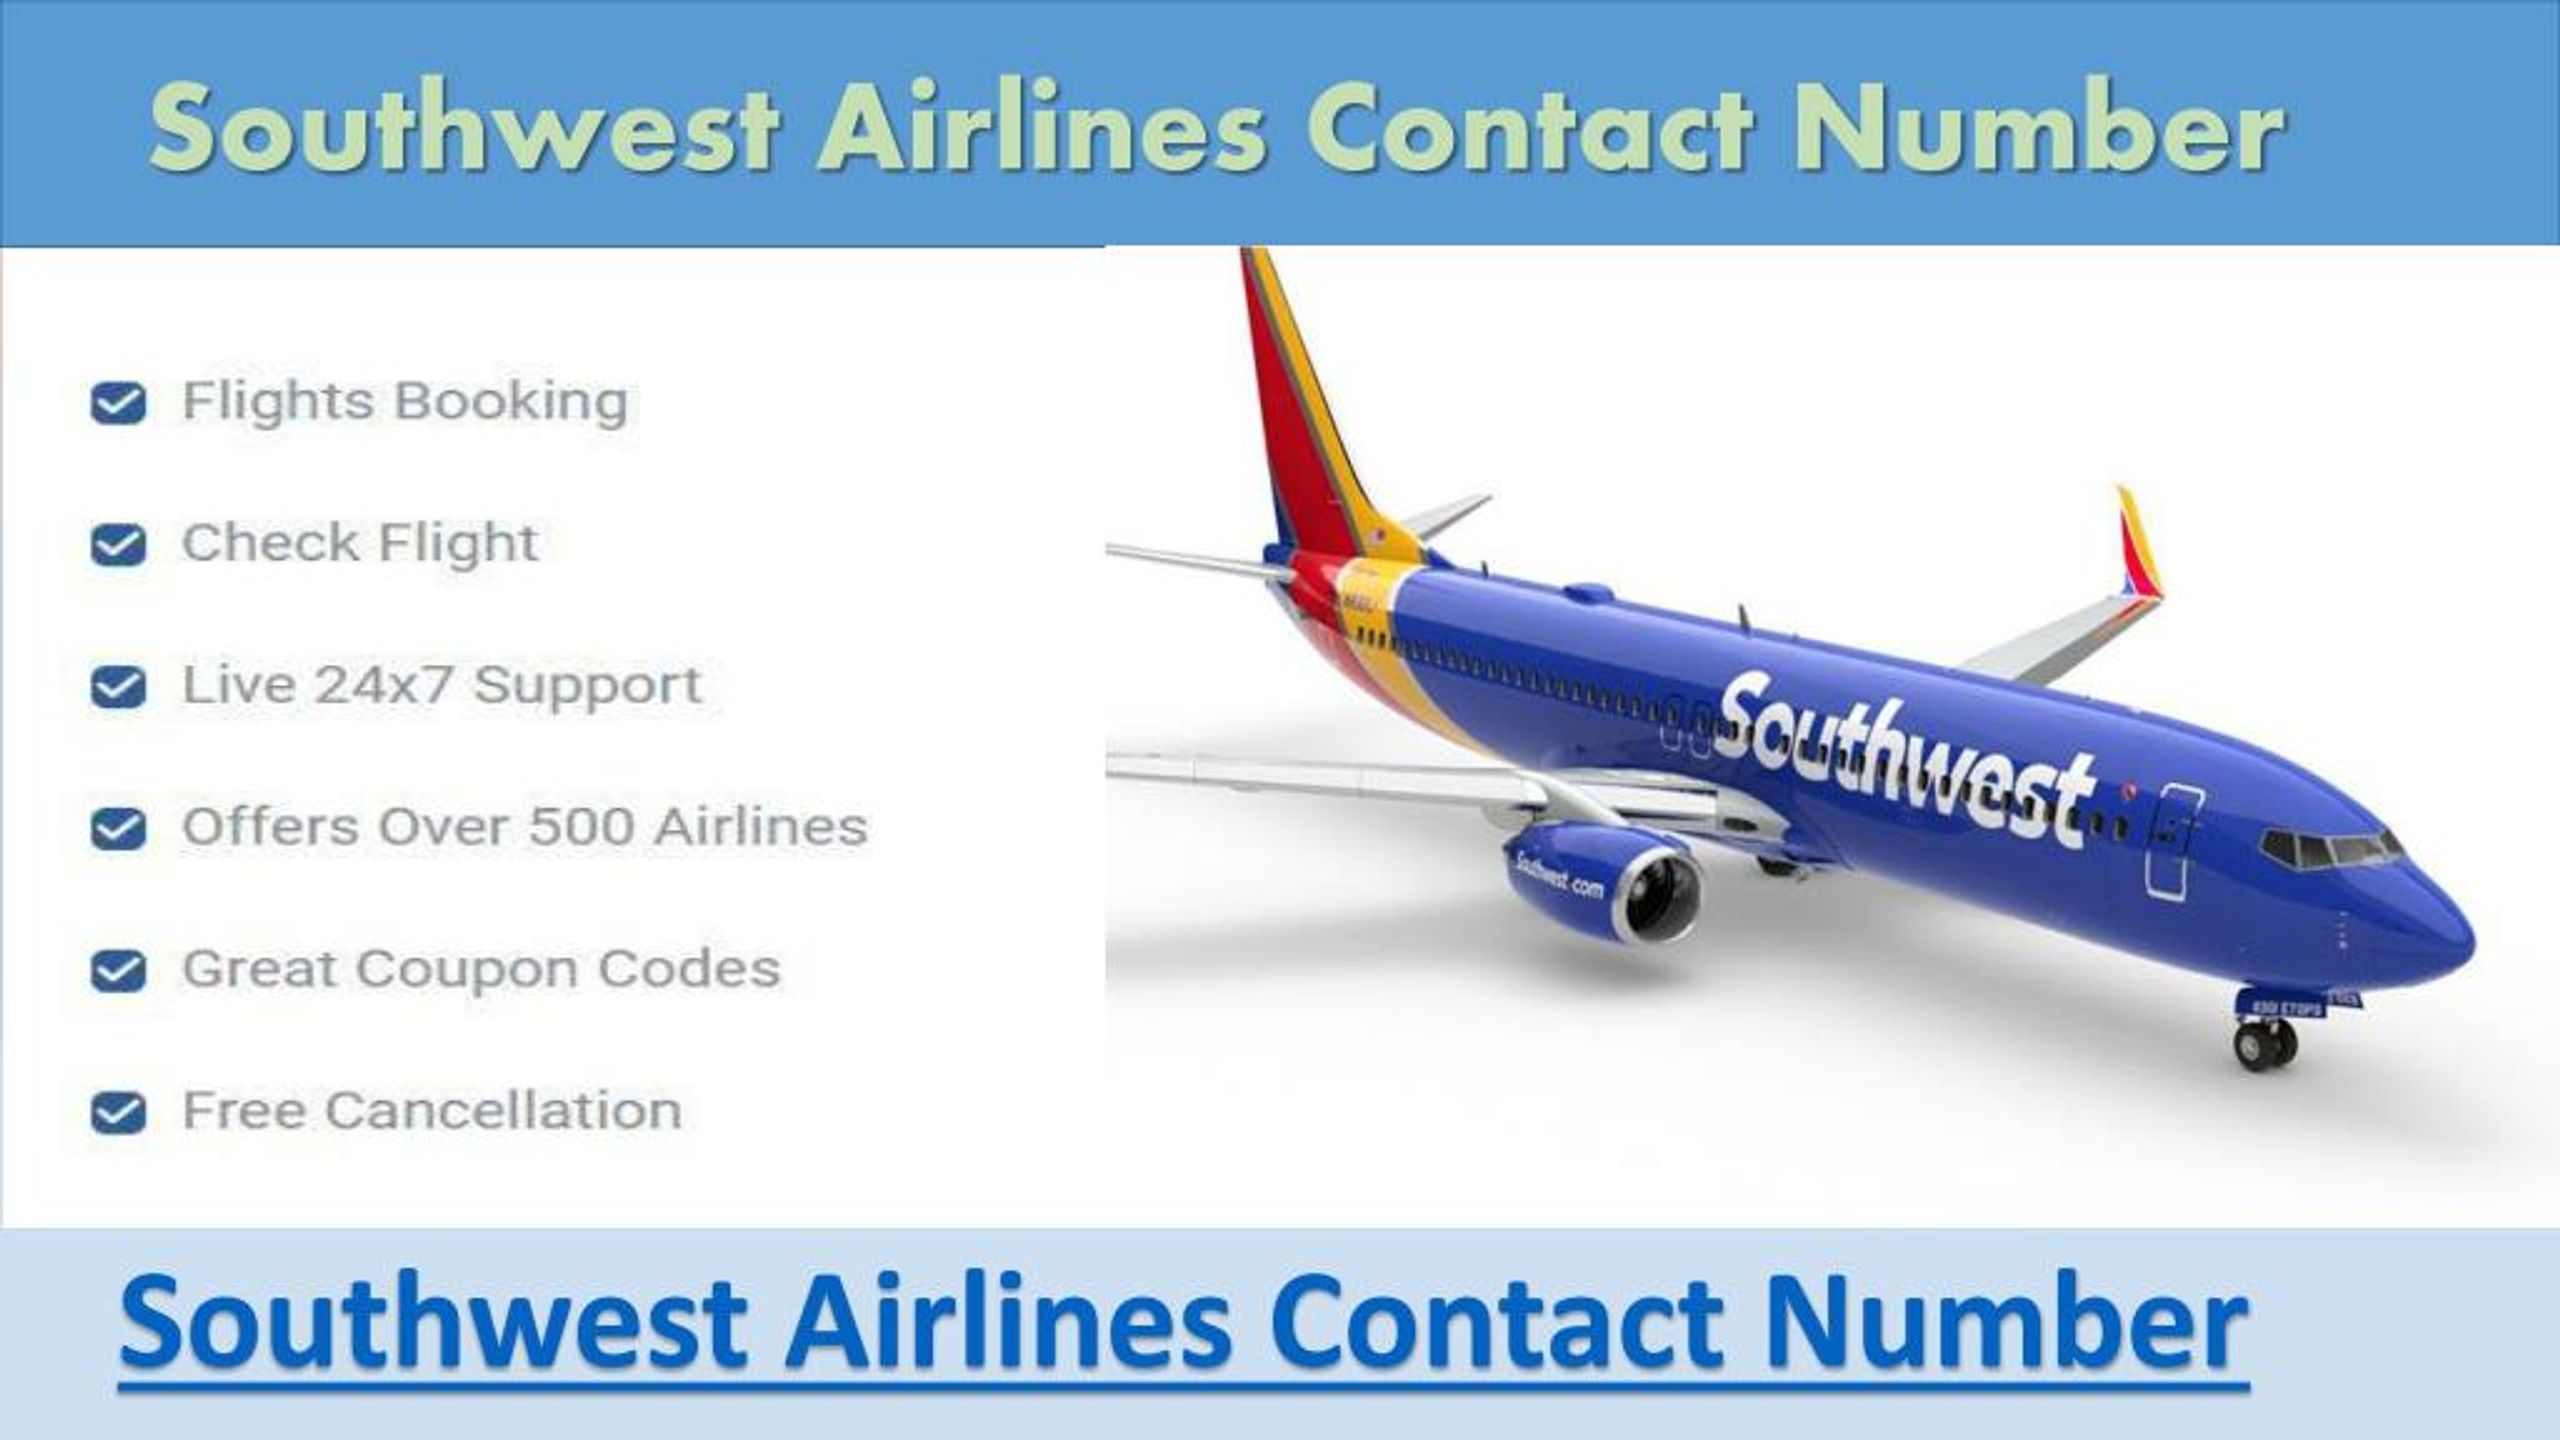 southwest airlines phone number